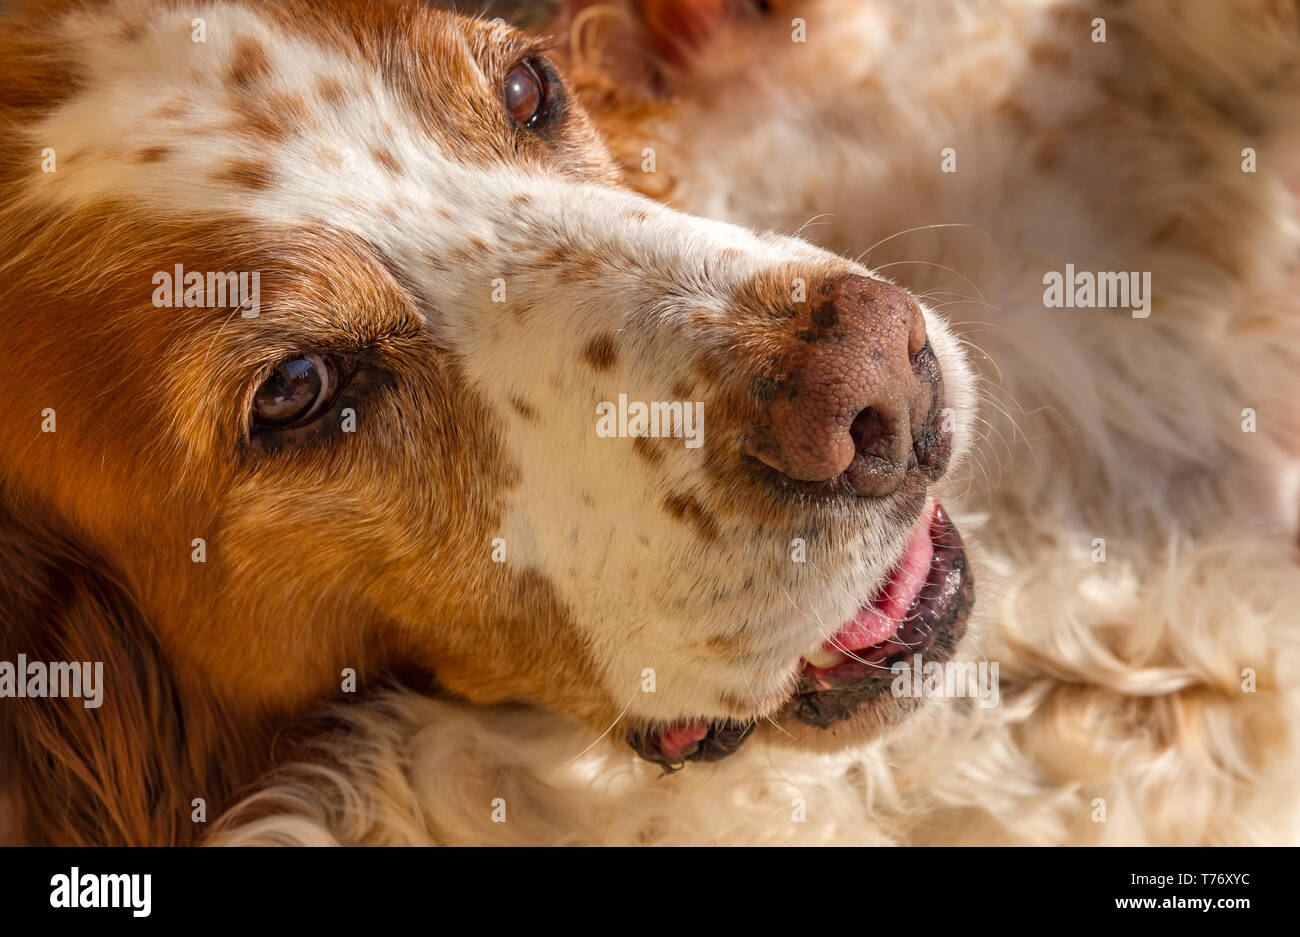 Closeup portrait of an orange and white american brittany spaniel with cute freckles on nose and forehead. Stock Photo